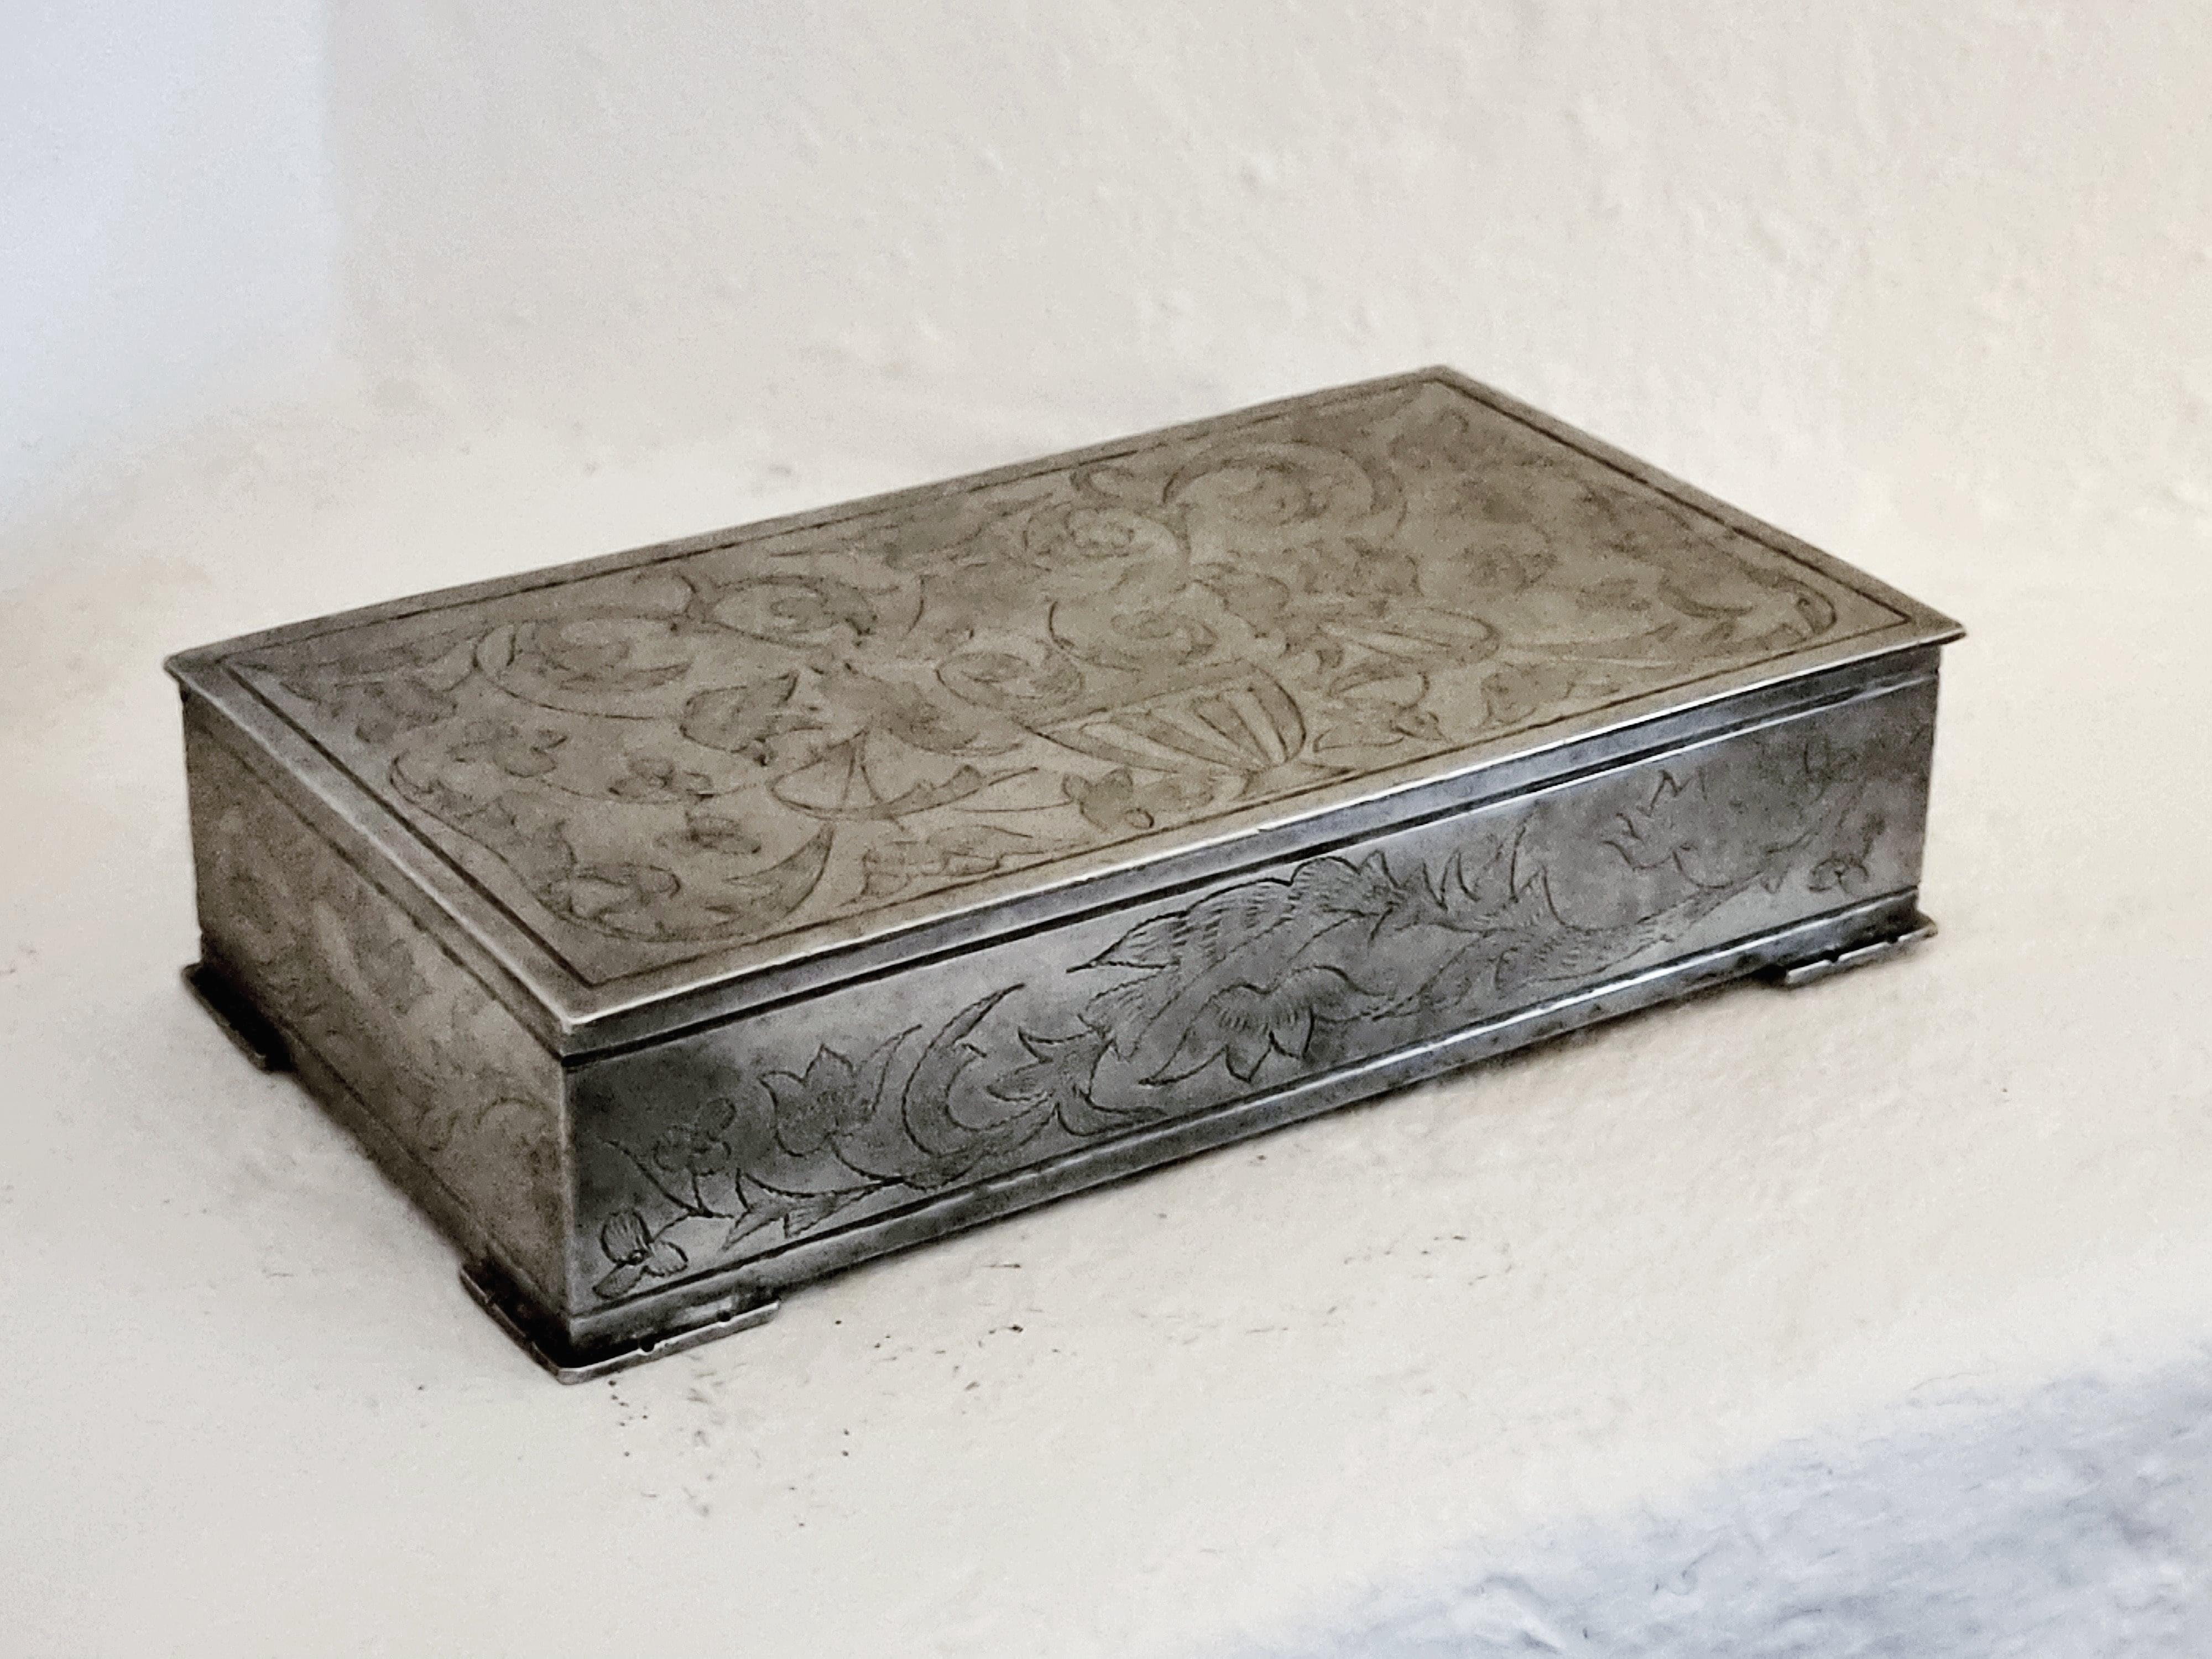 A rare pewter jewelry / tobacco box attributed Uno Åhren for Firma Svenskt Tenn. With hallmarks: Stockholm, The angels = Firma Svenskt Tenn, C8 = 1929.

The National Museum in Stockholm had an exhibition called SWEDISH GRACE (2021/2022), in this